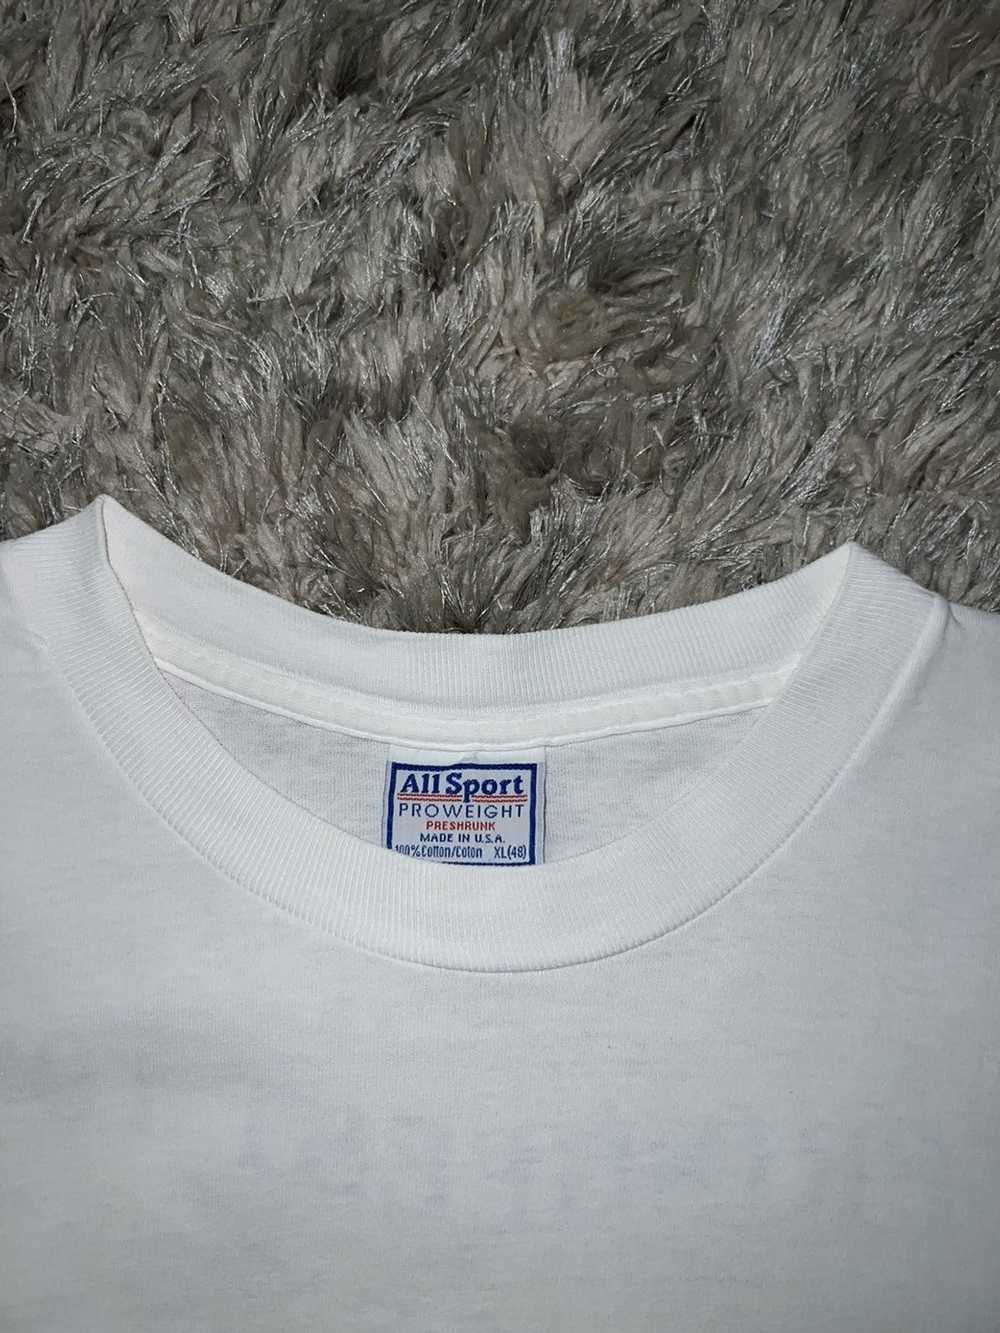 Band Tees × Made In Usa × Vintage Rare Vintage 90… - image 8